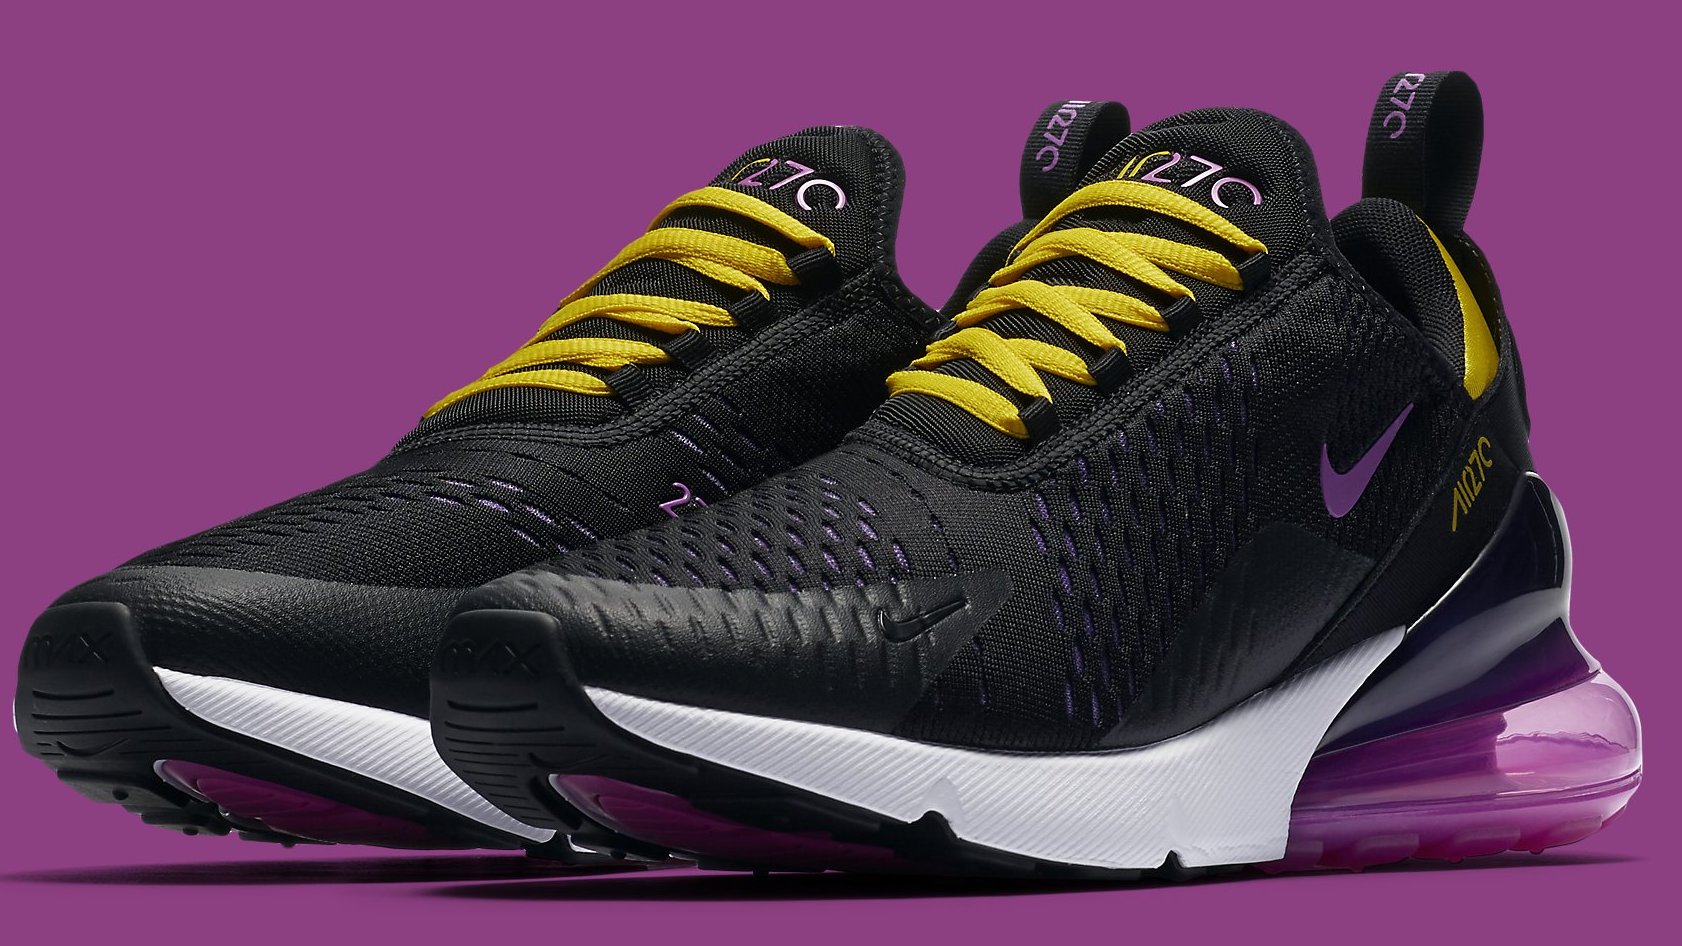 Nike Air Max 270 to Release 'Hyper Magenta' Colorway